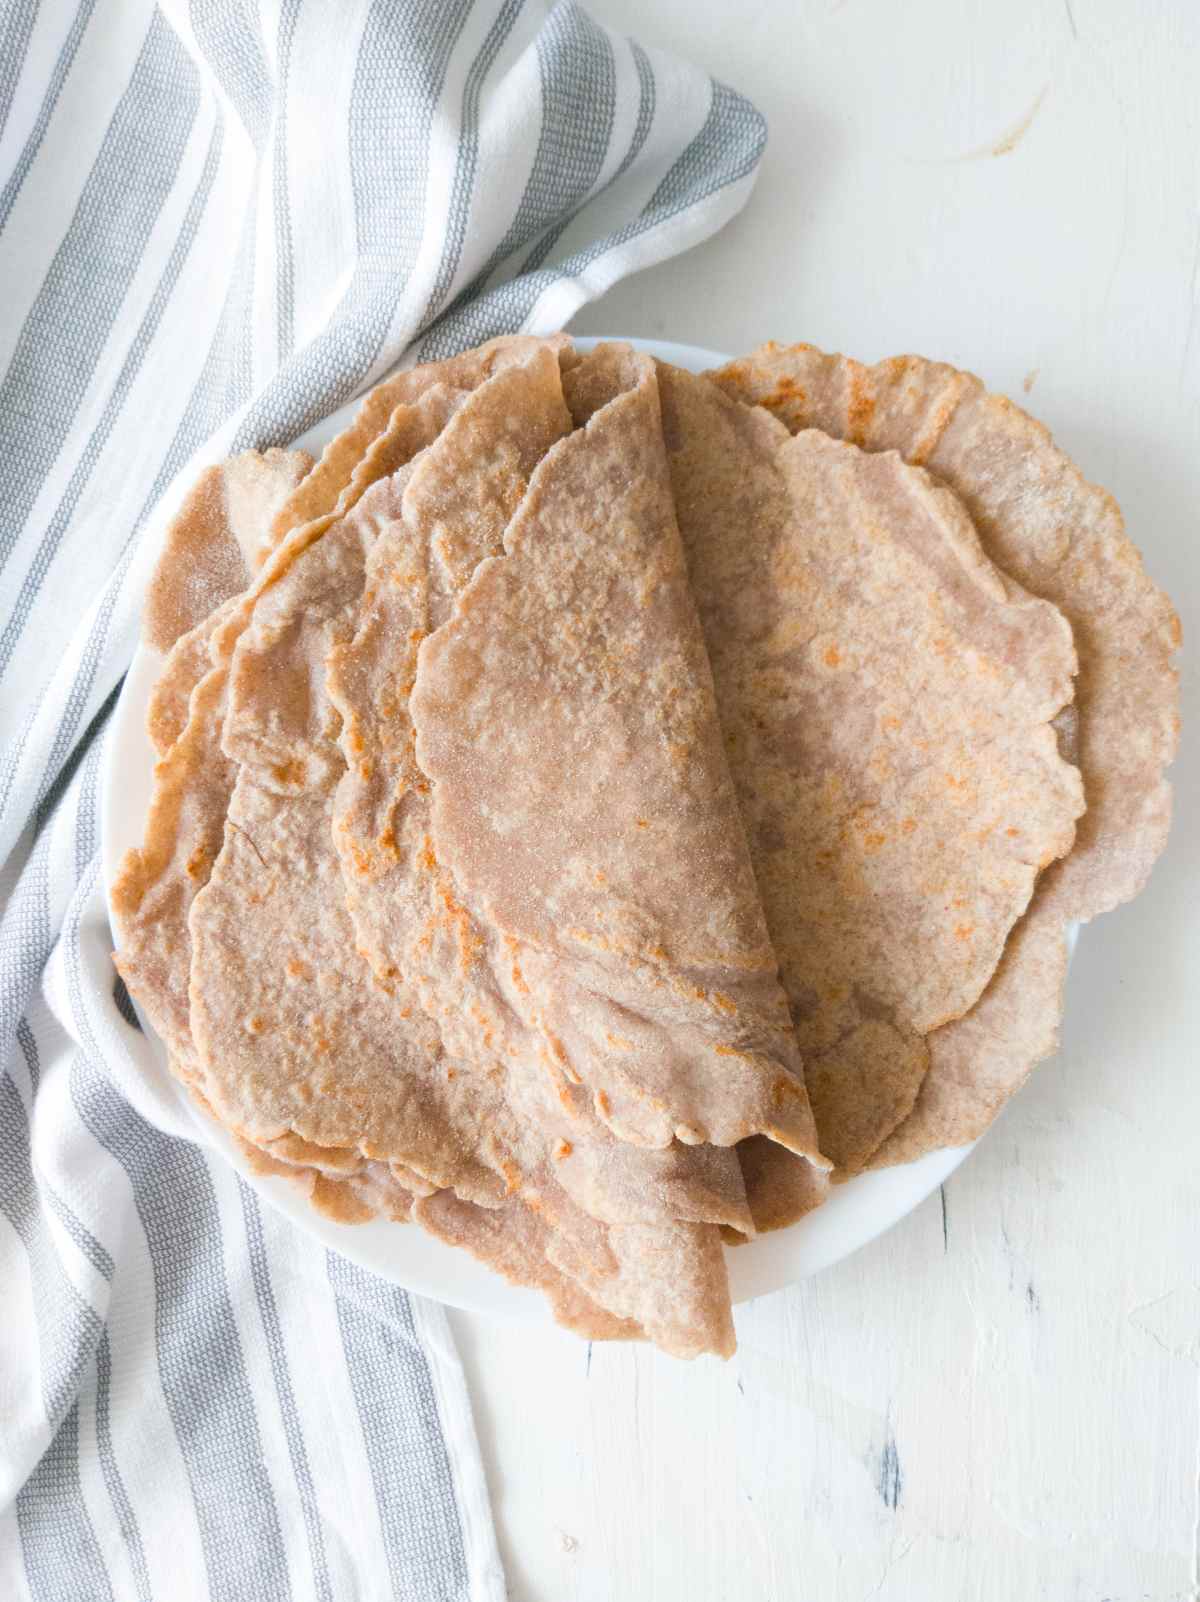 Buckwheat tortilla wraps on a plate against a white surface with a kitchen towel.